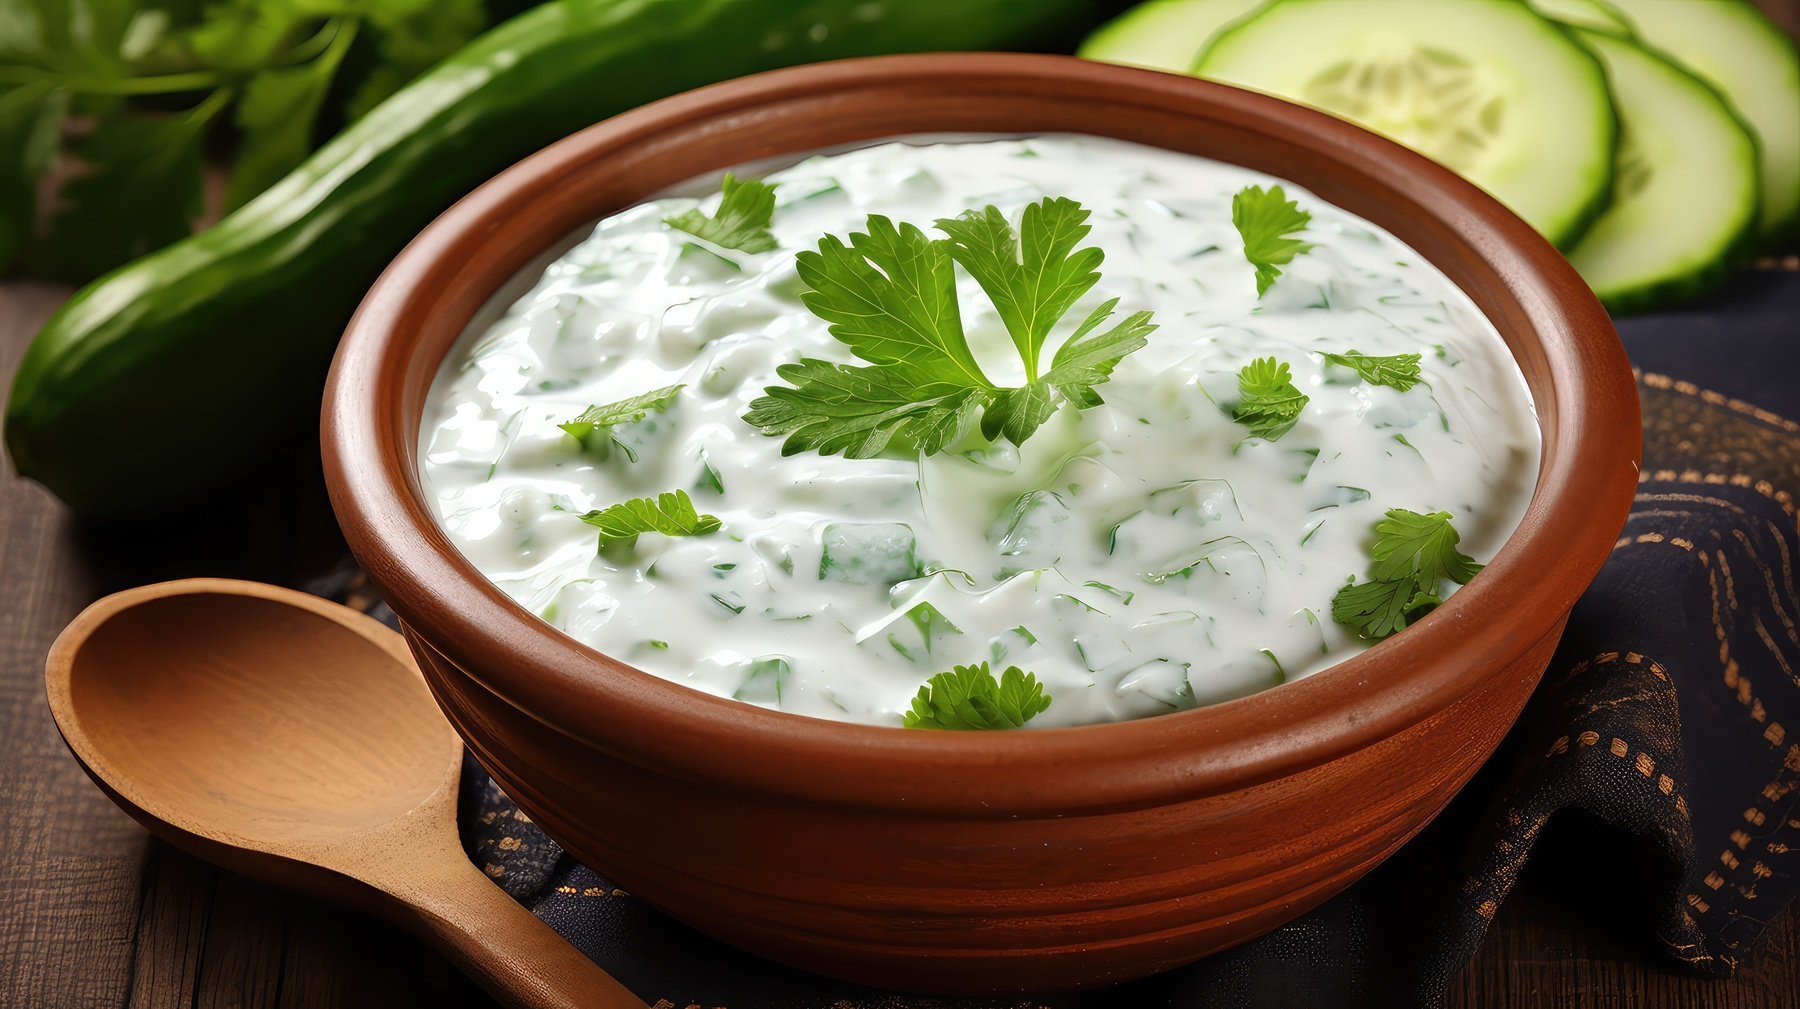 Cucumber Raita: Refreshing yogurt-based dip with diced cucumbers and aromatic spices, ideal for Indian cuisine